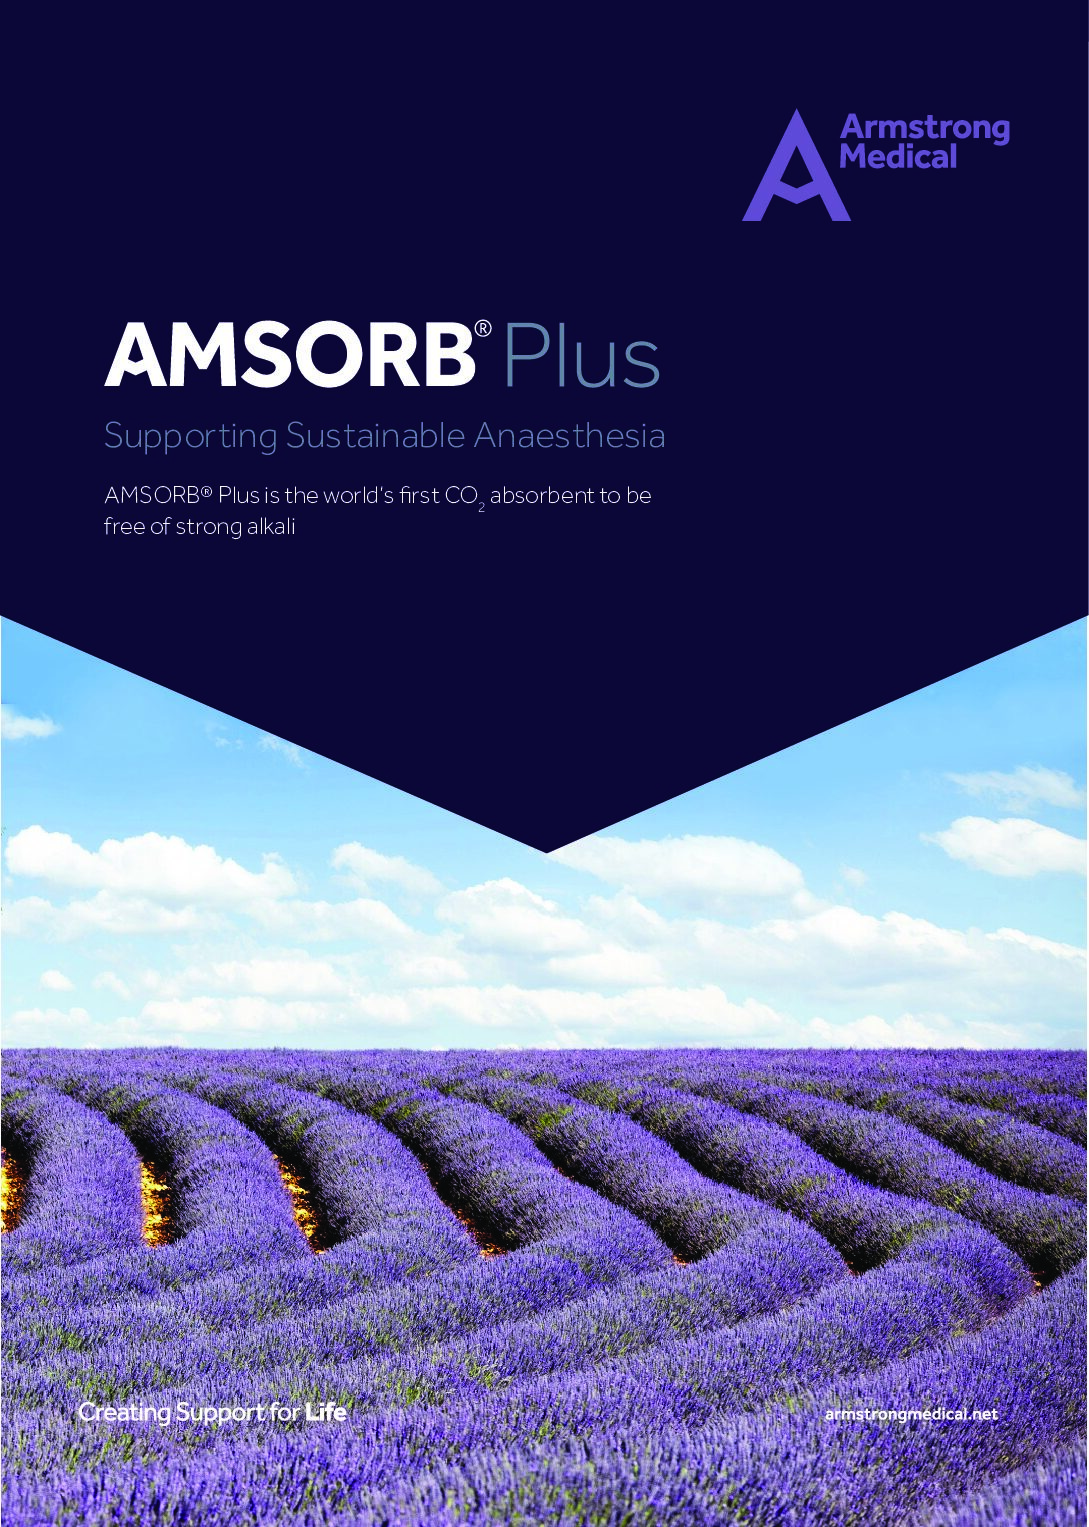 AMSORB Plus Sustainable Anaesthesia Brochure v1 1 pdf Armstrong Medical | Medical Device Manufacturer